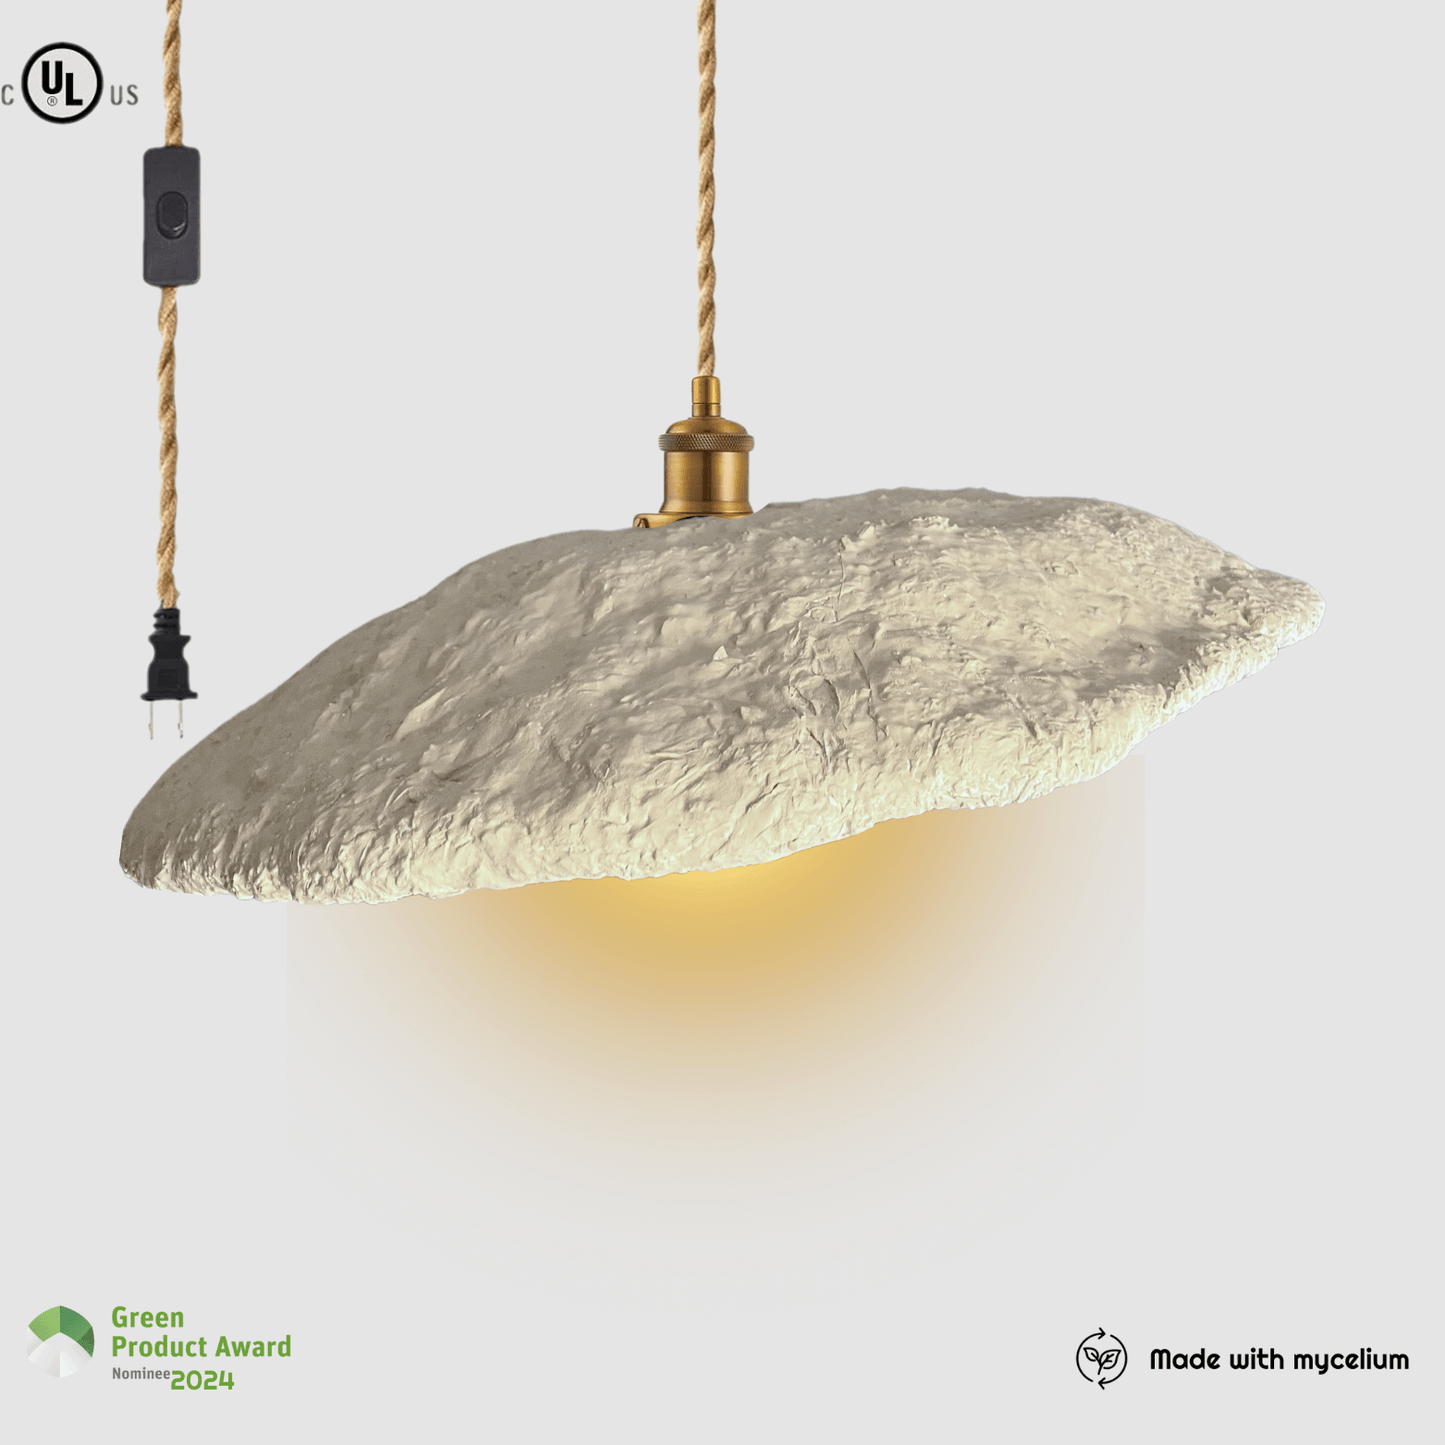 Eco-Friendly Light Pendant with Air-Purifying Features